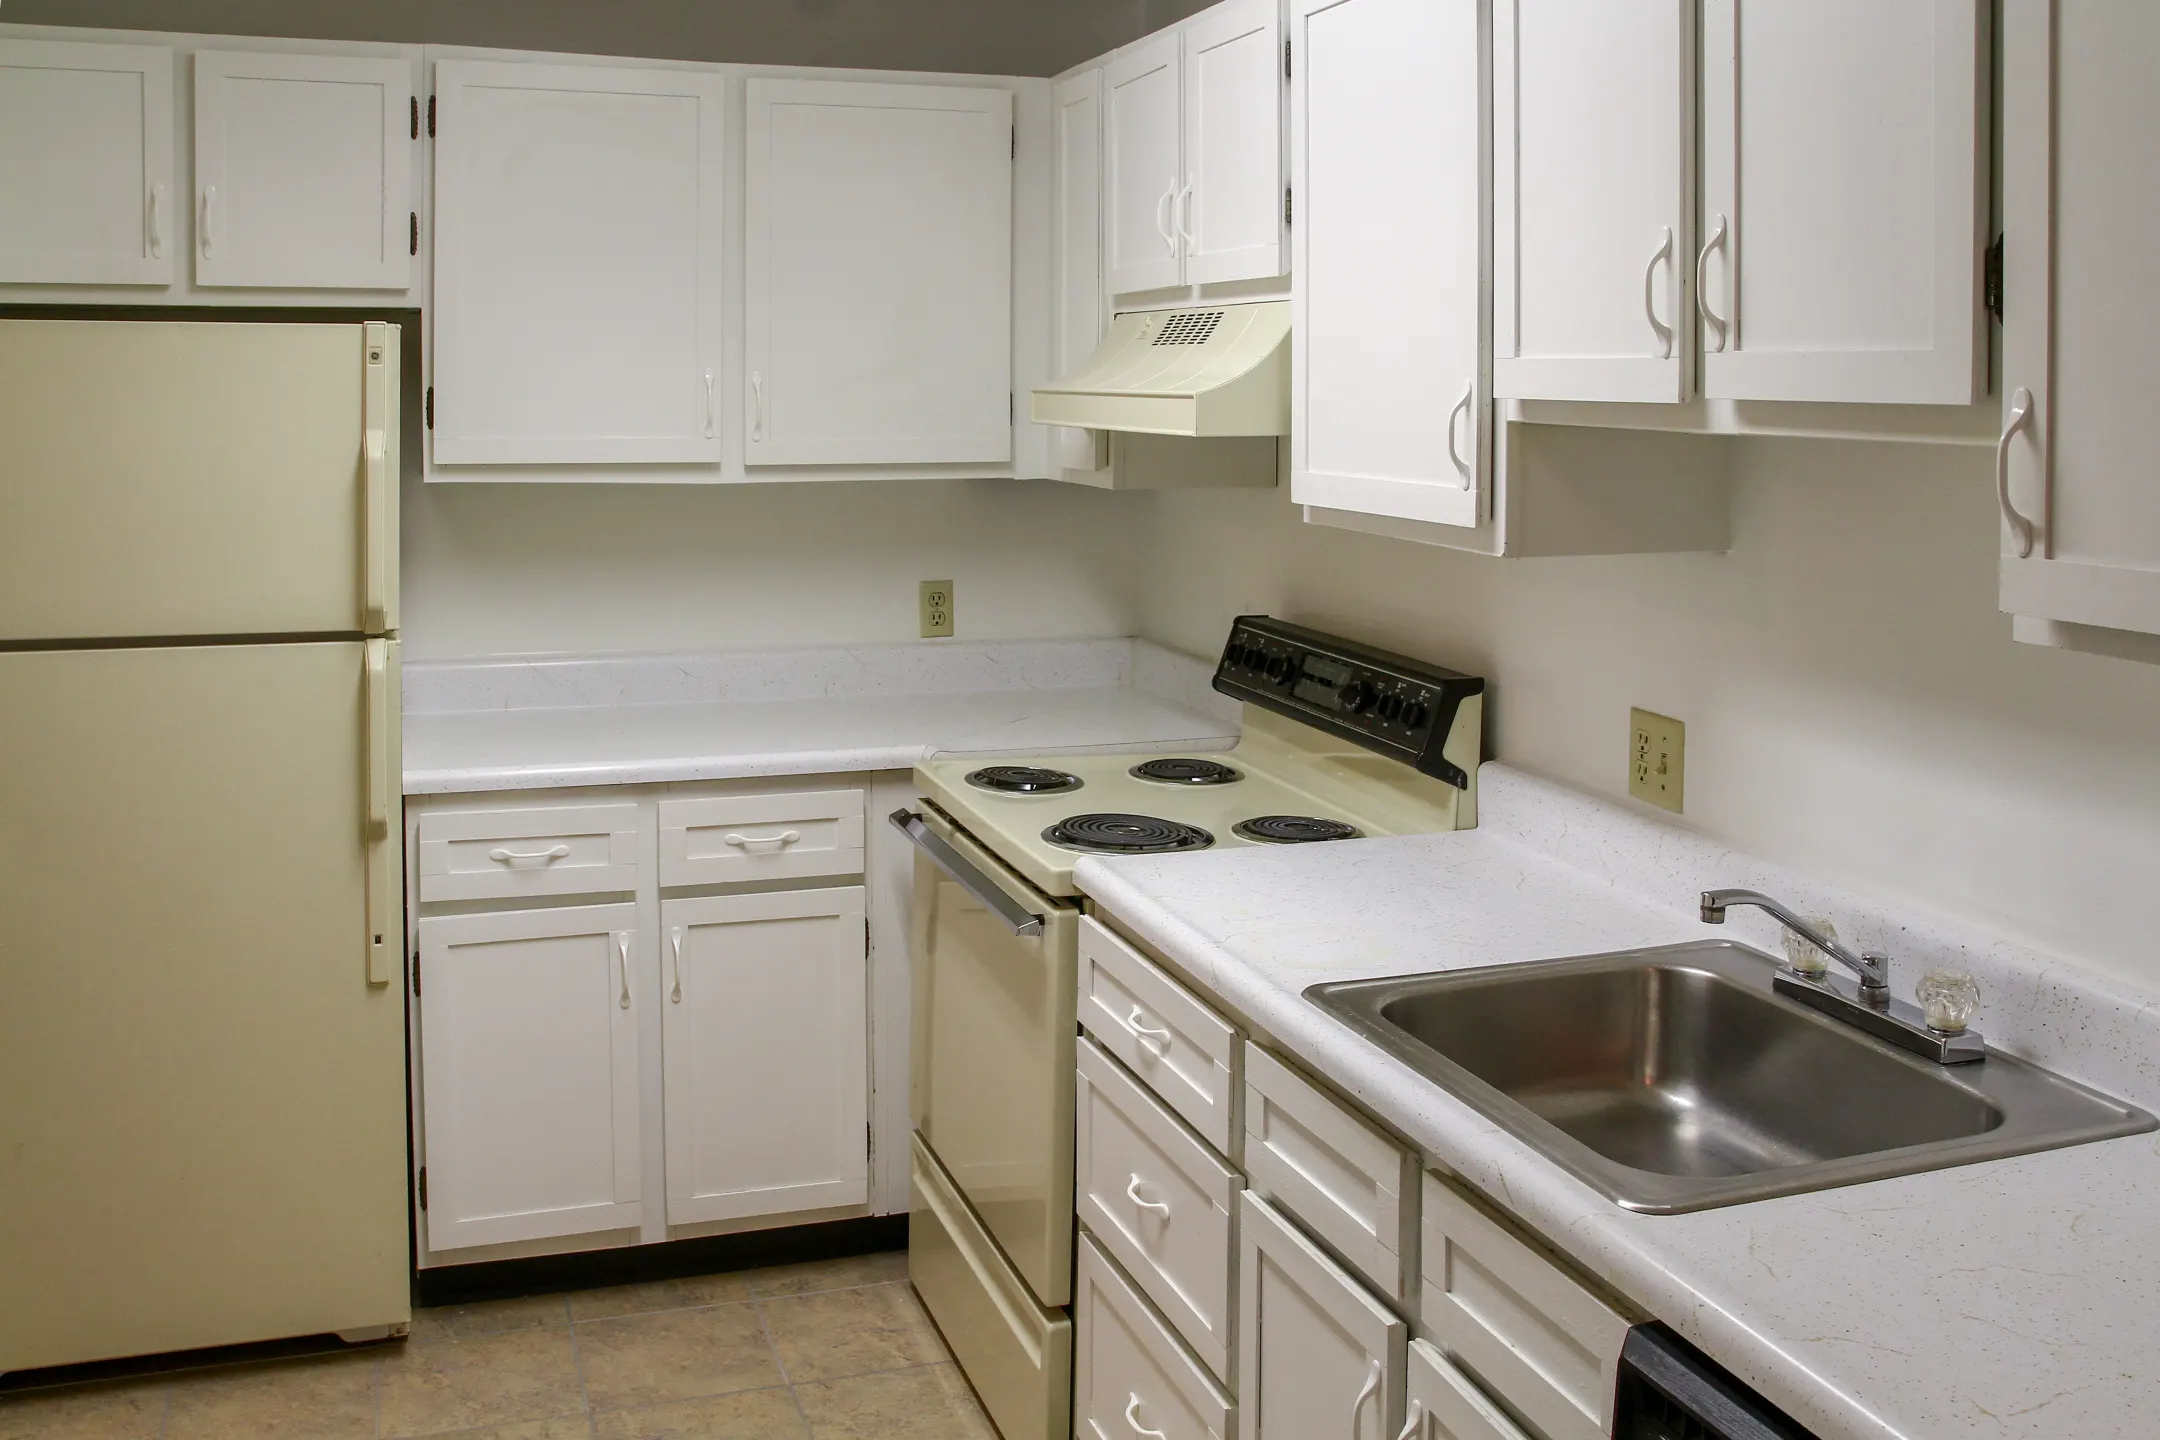 Kitchen - Colony Bay Apartments - Fort Wayne, IN